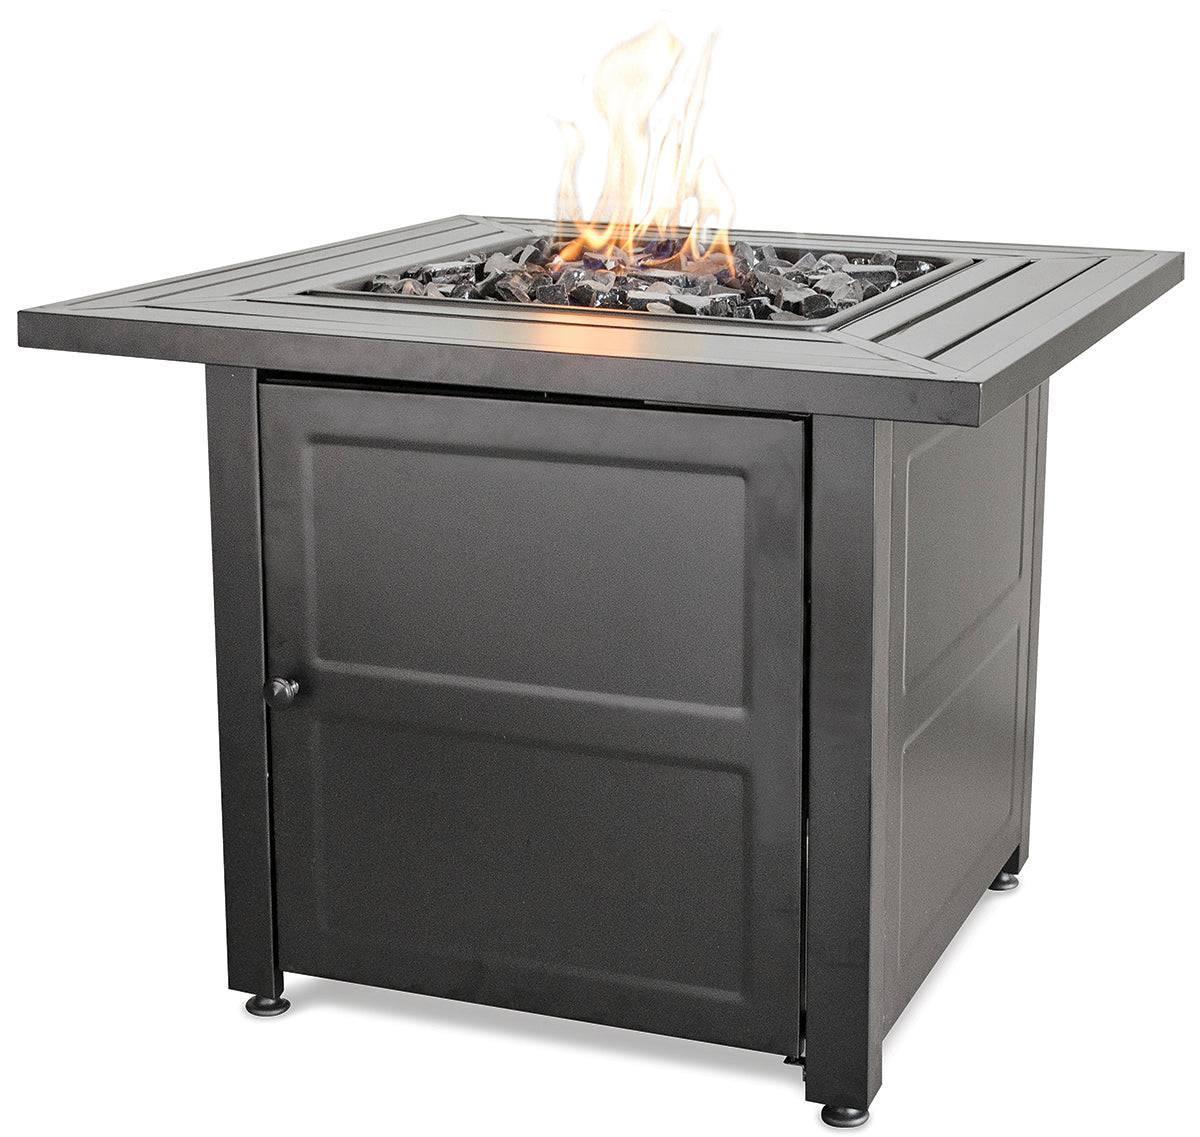 Endless Summer 30" Steel Mantel Propane Outdoor Fire Pit Table - Kozy Korner Fire Pits